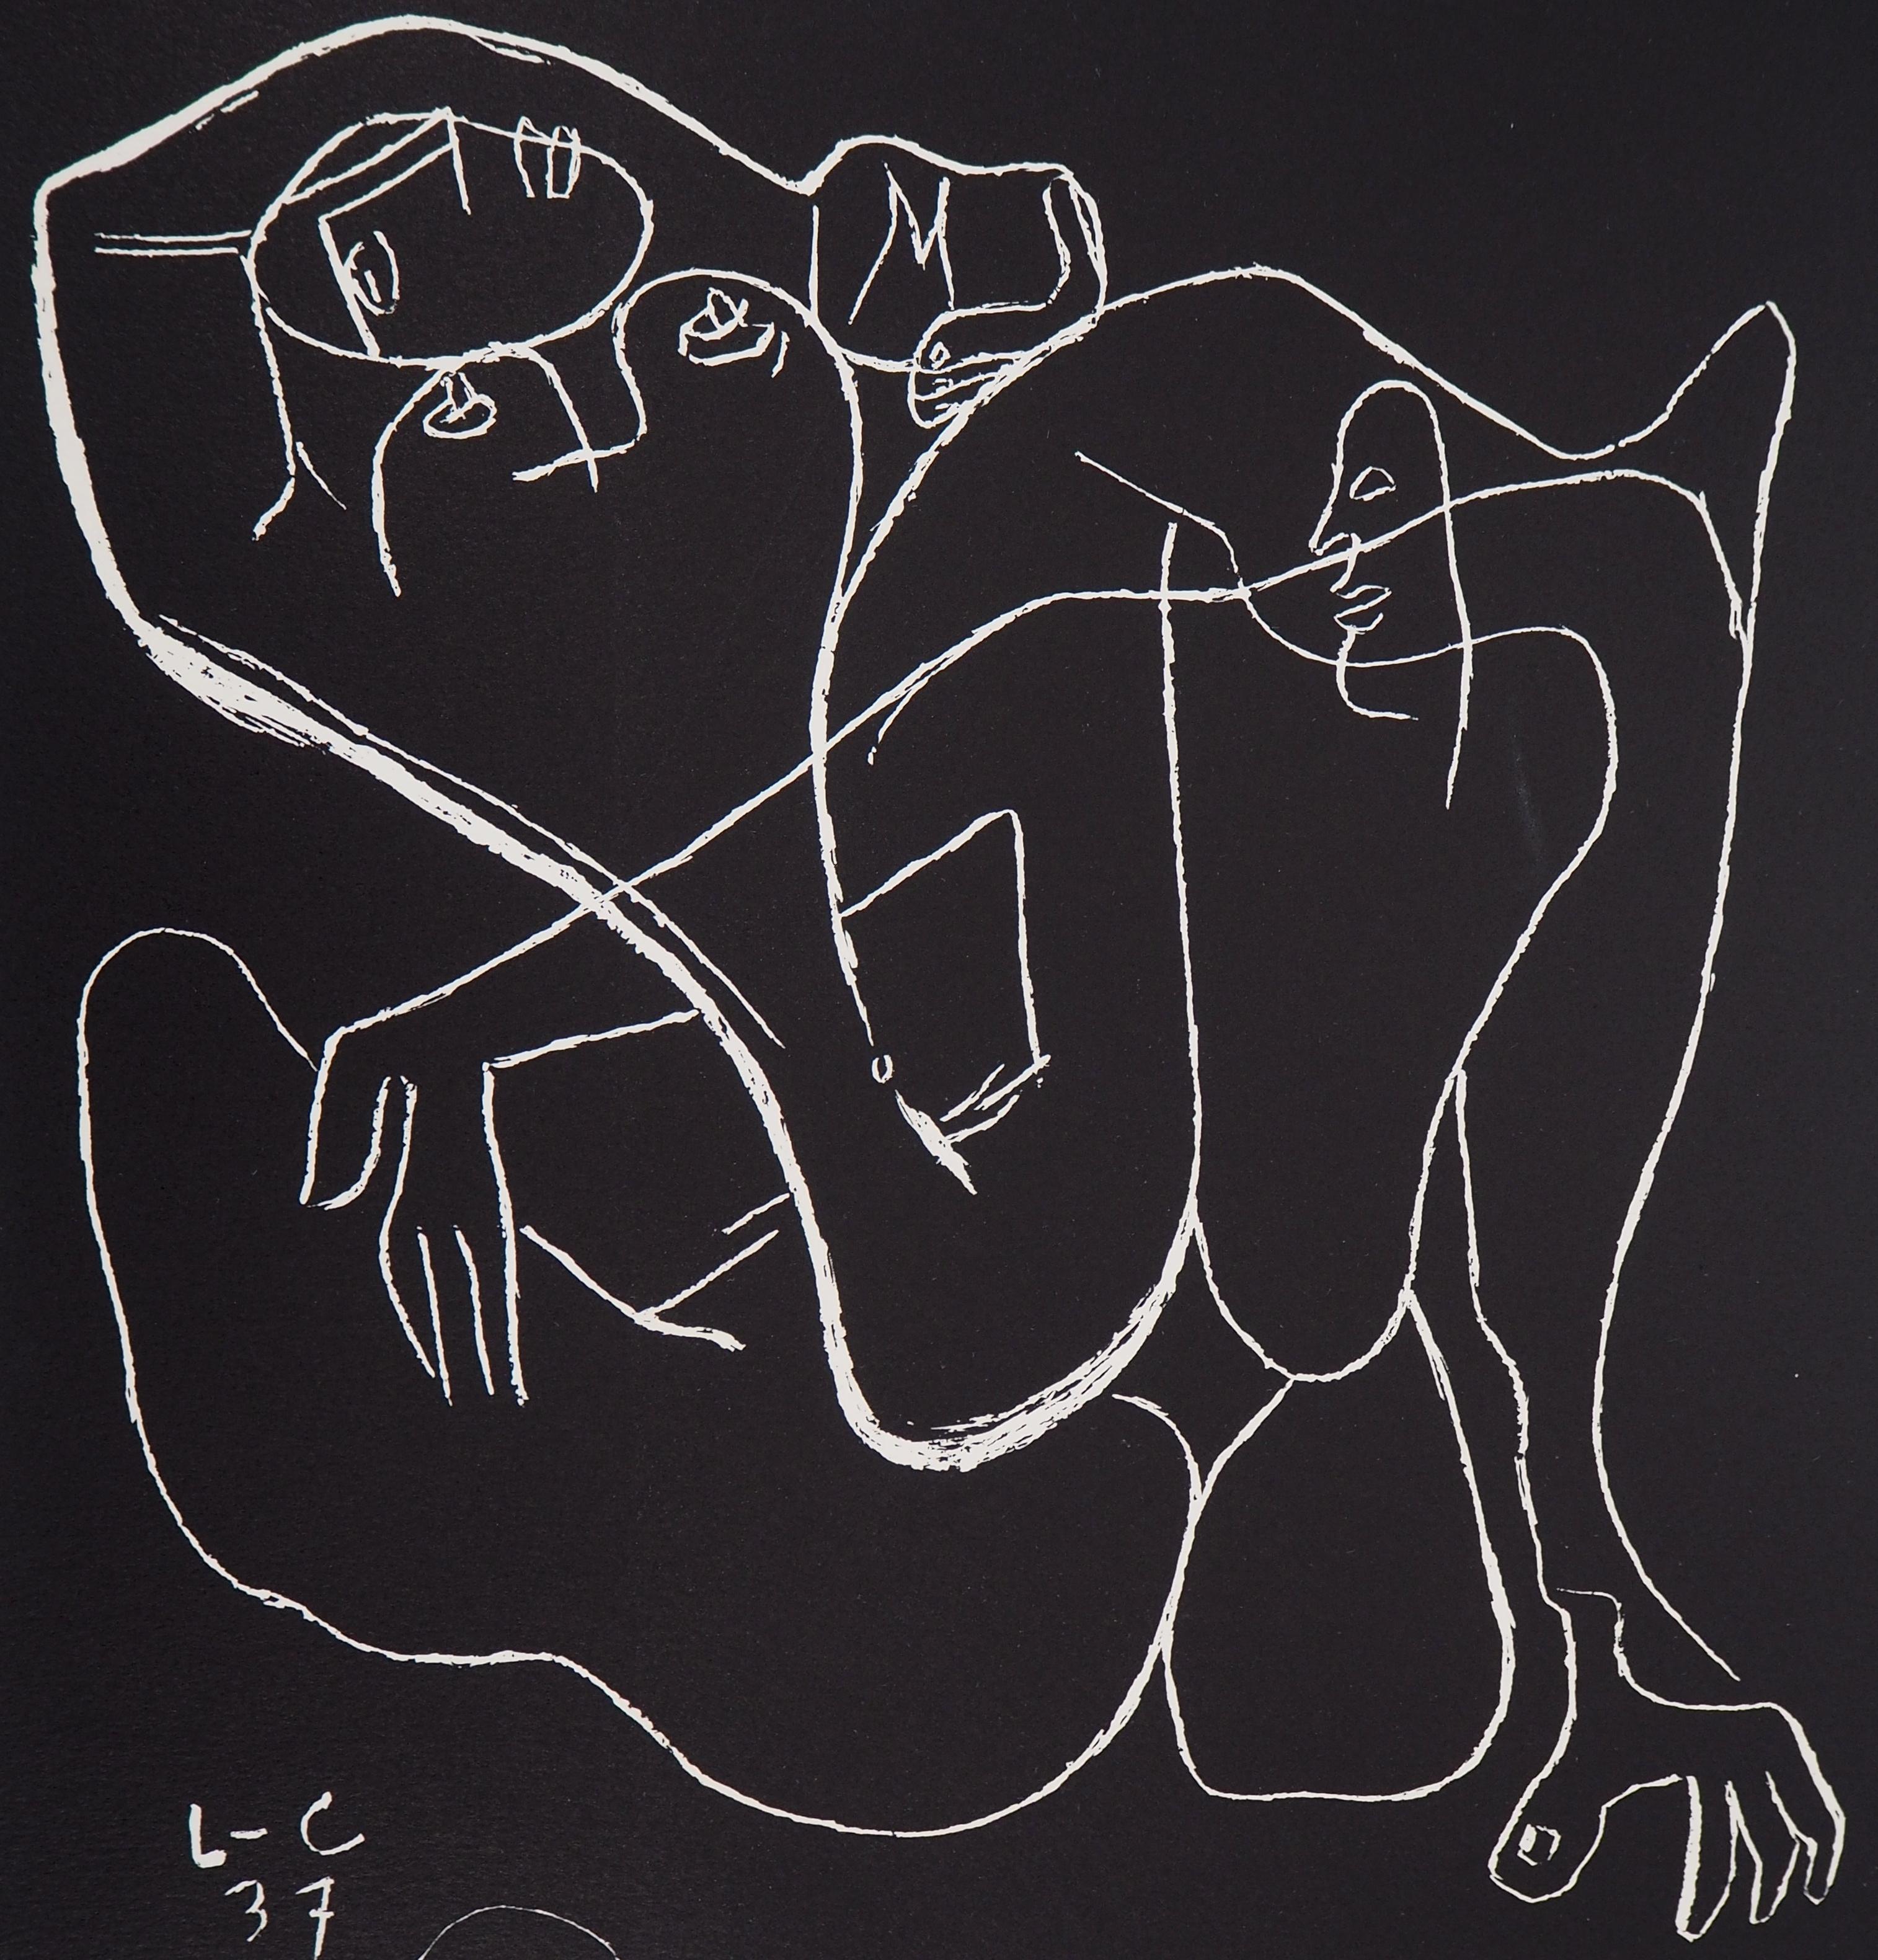 Le Corbusier
Passion of the Lovers, 1964

Original lithograph
Printed signature in the plate
Limited to 250 copies
On Arches vellum 42.5 x 35.5 cm (c. 16.5 x  13.7 in)
Edited by Forces-Vives (Paris) in 1964

Excellent condition